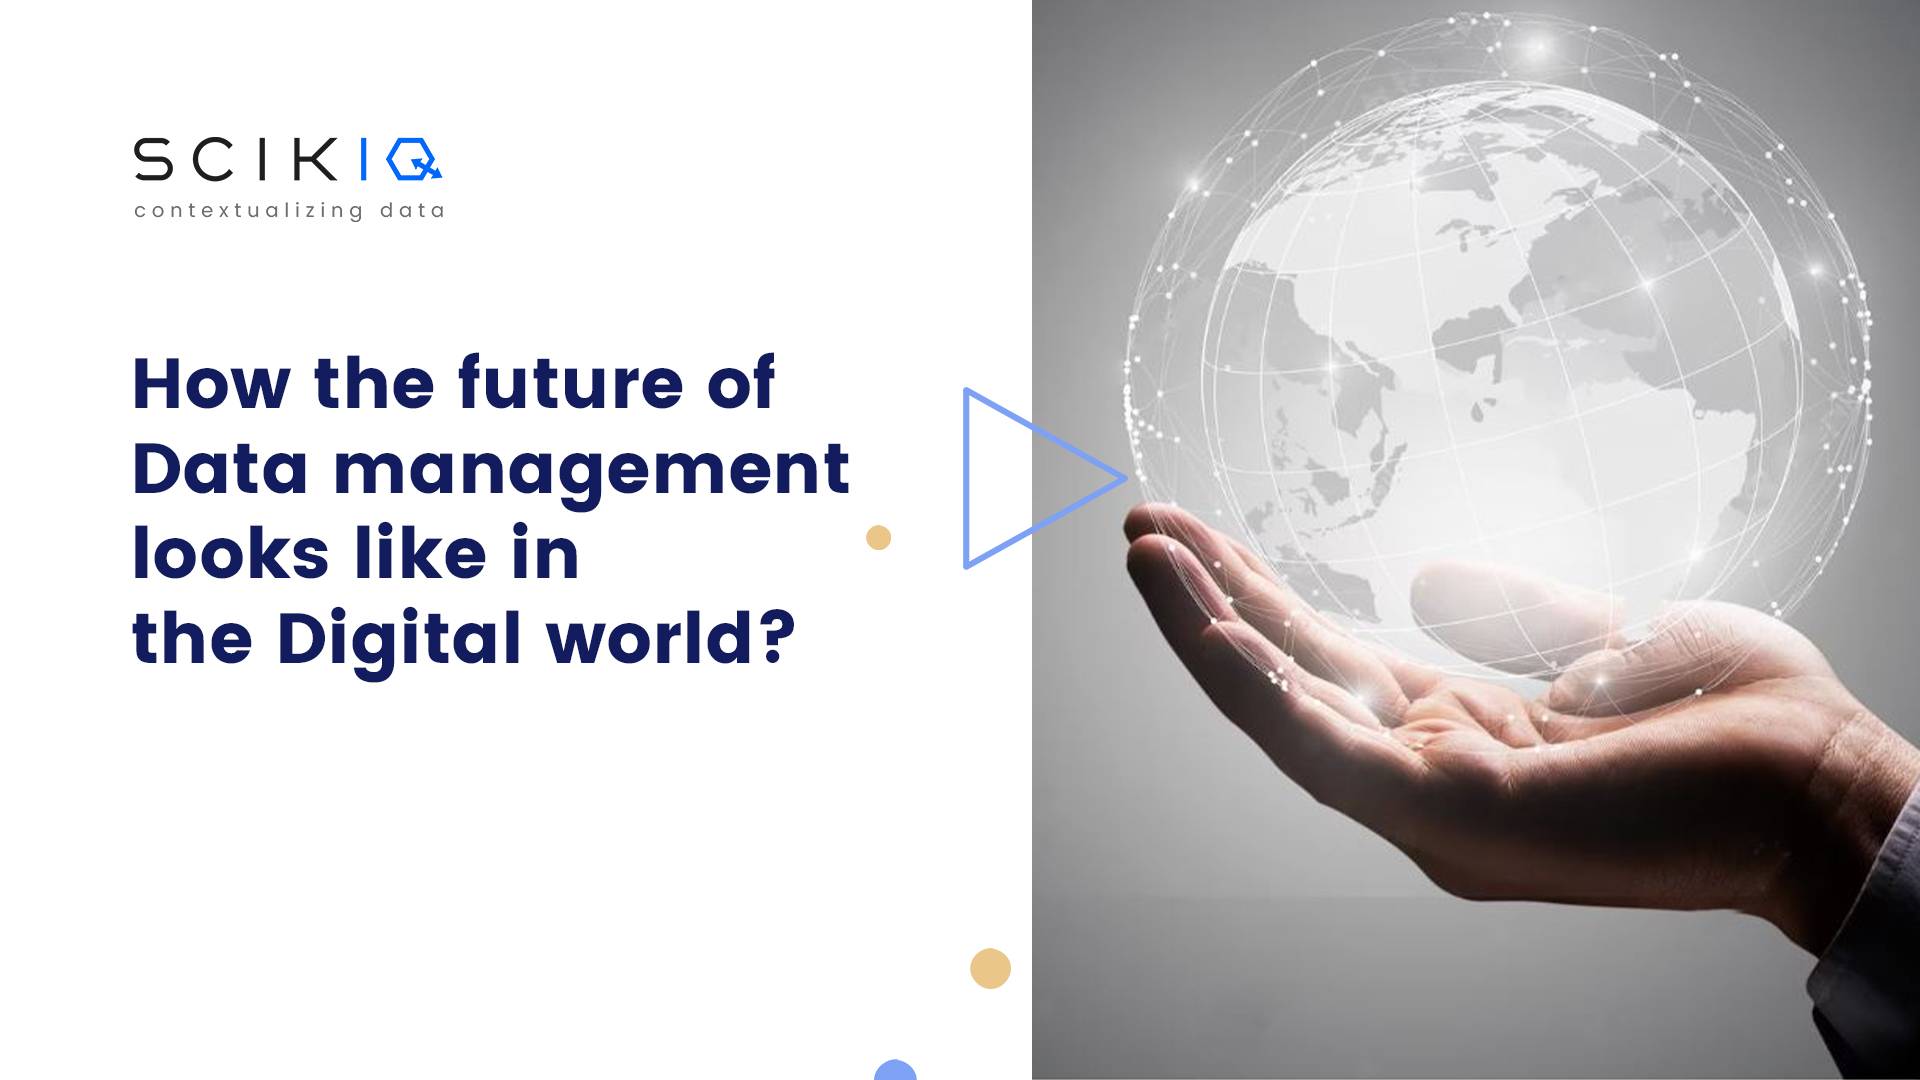 What does the future of data management look like in the digital world?